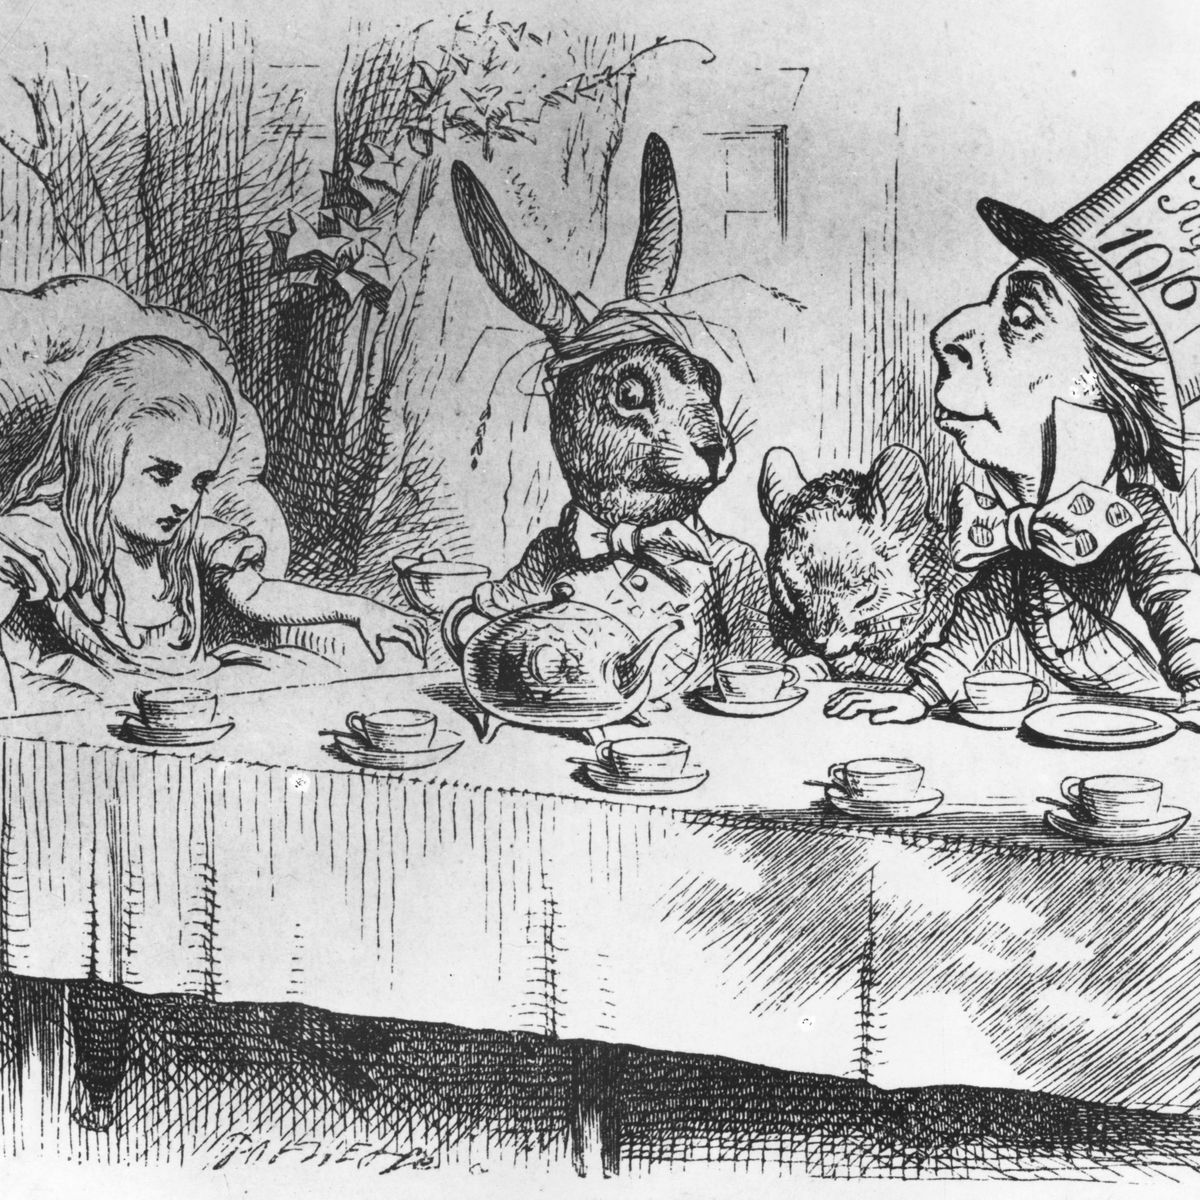 https://hips.hearstapps.com/hmg-prod/images/alice-the-march-hare-the-dormouse-and-the-mad-hatter-at-the-latters-tea-party-from-alice-in-wonderland-by-lewis-carroll-alice-in-wonderland---1st-edition---pub-1865-illustration-by-j-tenniel-photo-by-.jpg?crop=0.7524009603841537xw:1xh;center,top&resize=1200:*